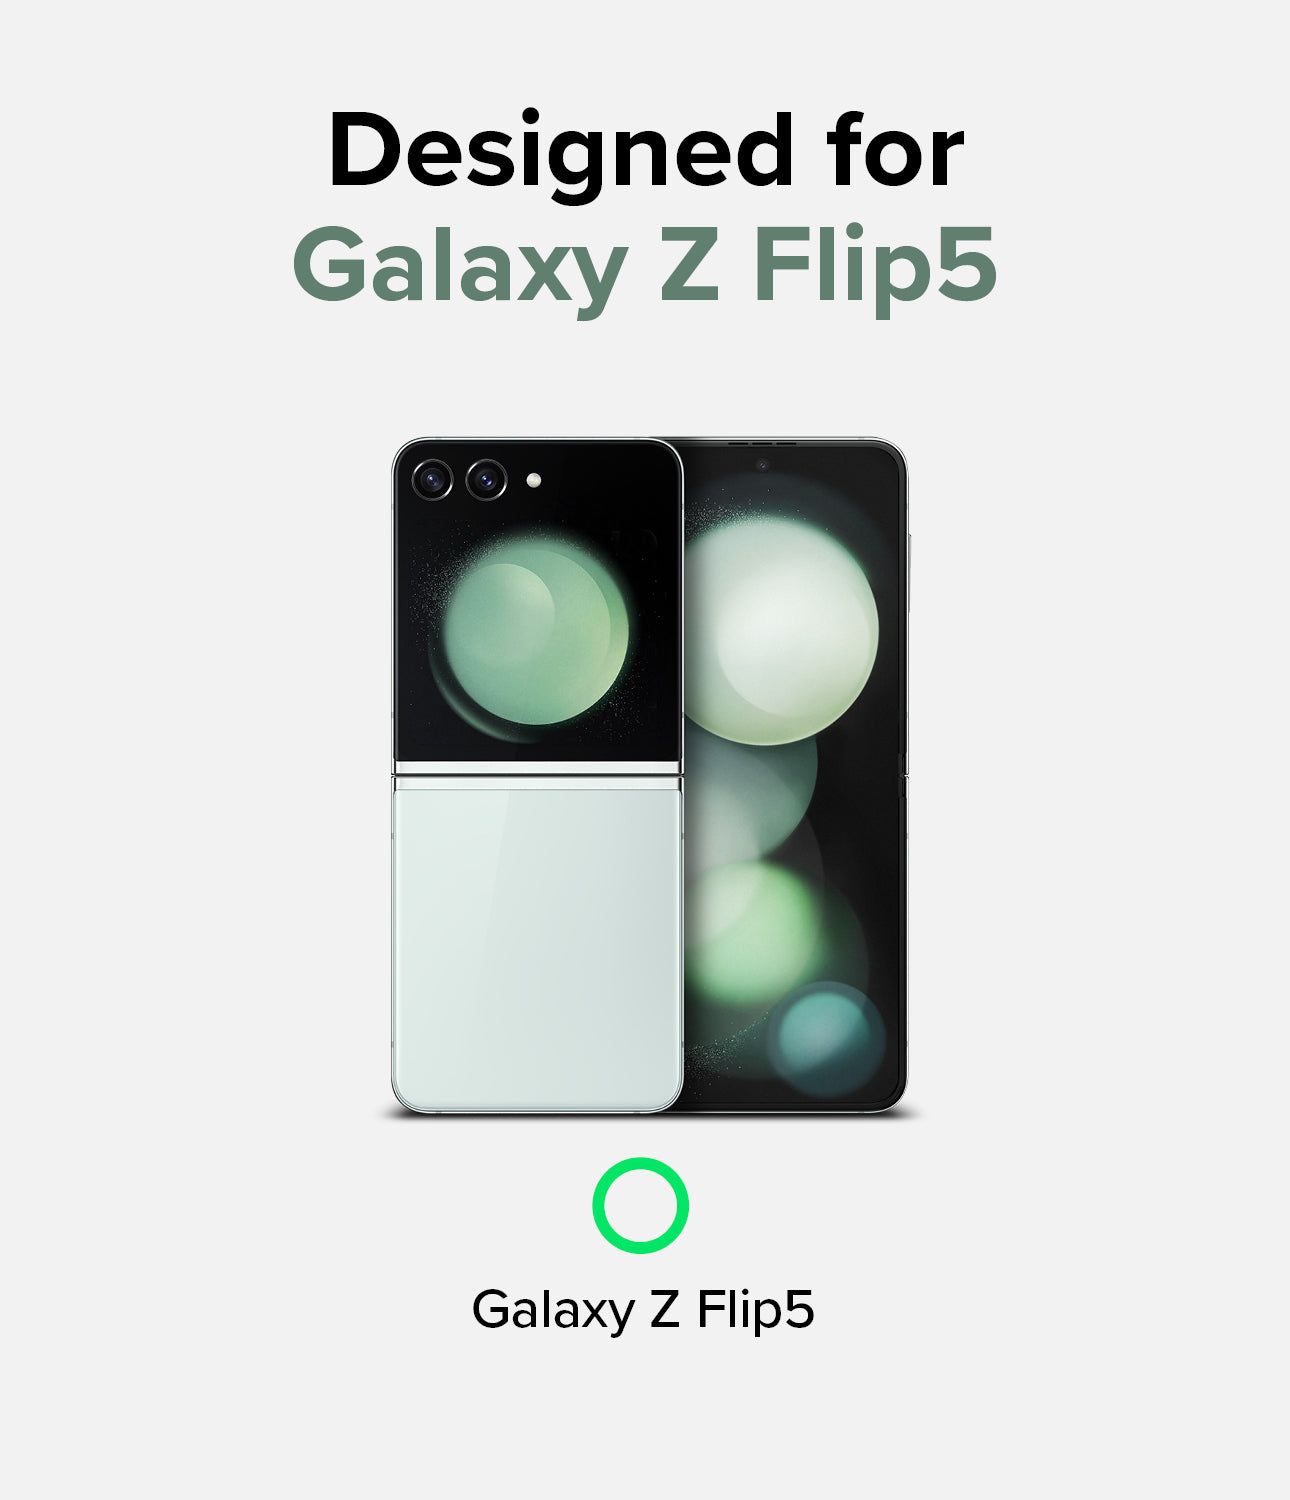 Galaxy Z Flip 5 Case | Slim Hinge Magnetic - Clear case with a built-in magnetic ring and hinge cover